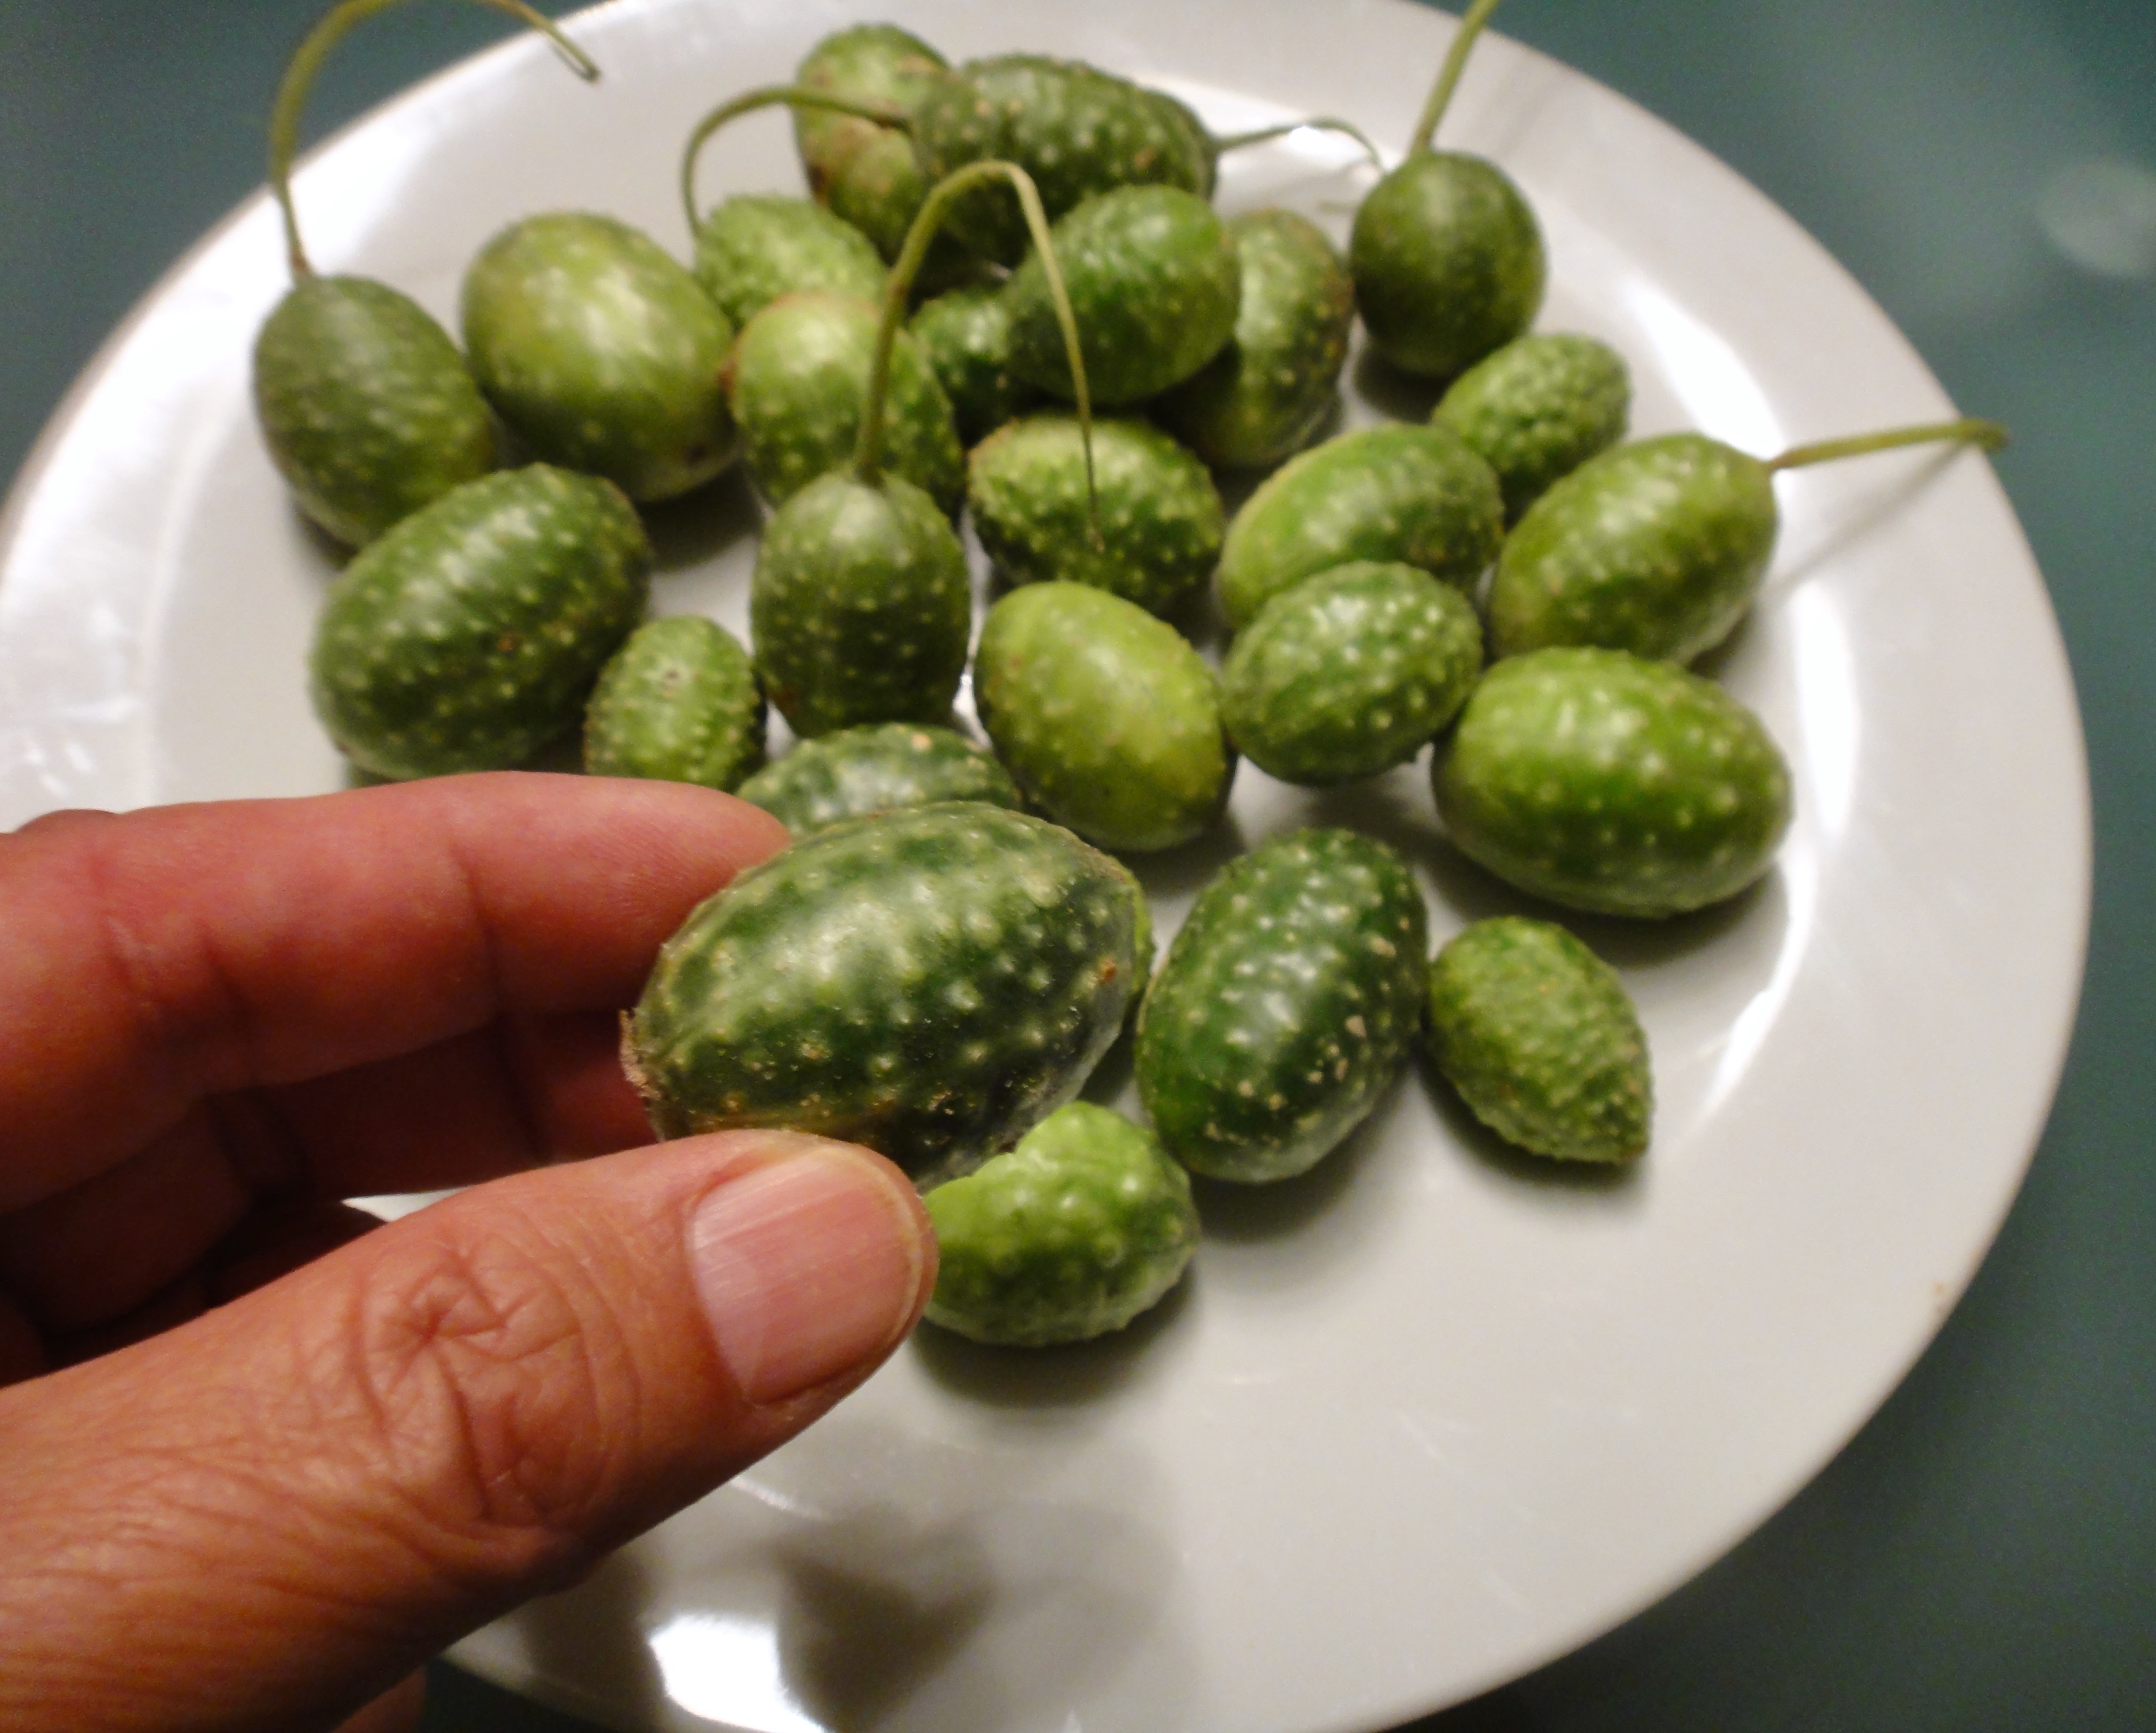 Pepinos Del Monte, Mexican sour gherkins, look like lilliputian watermelons